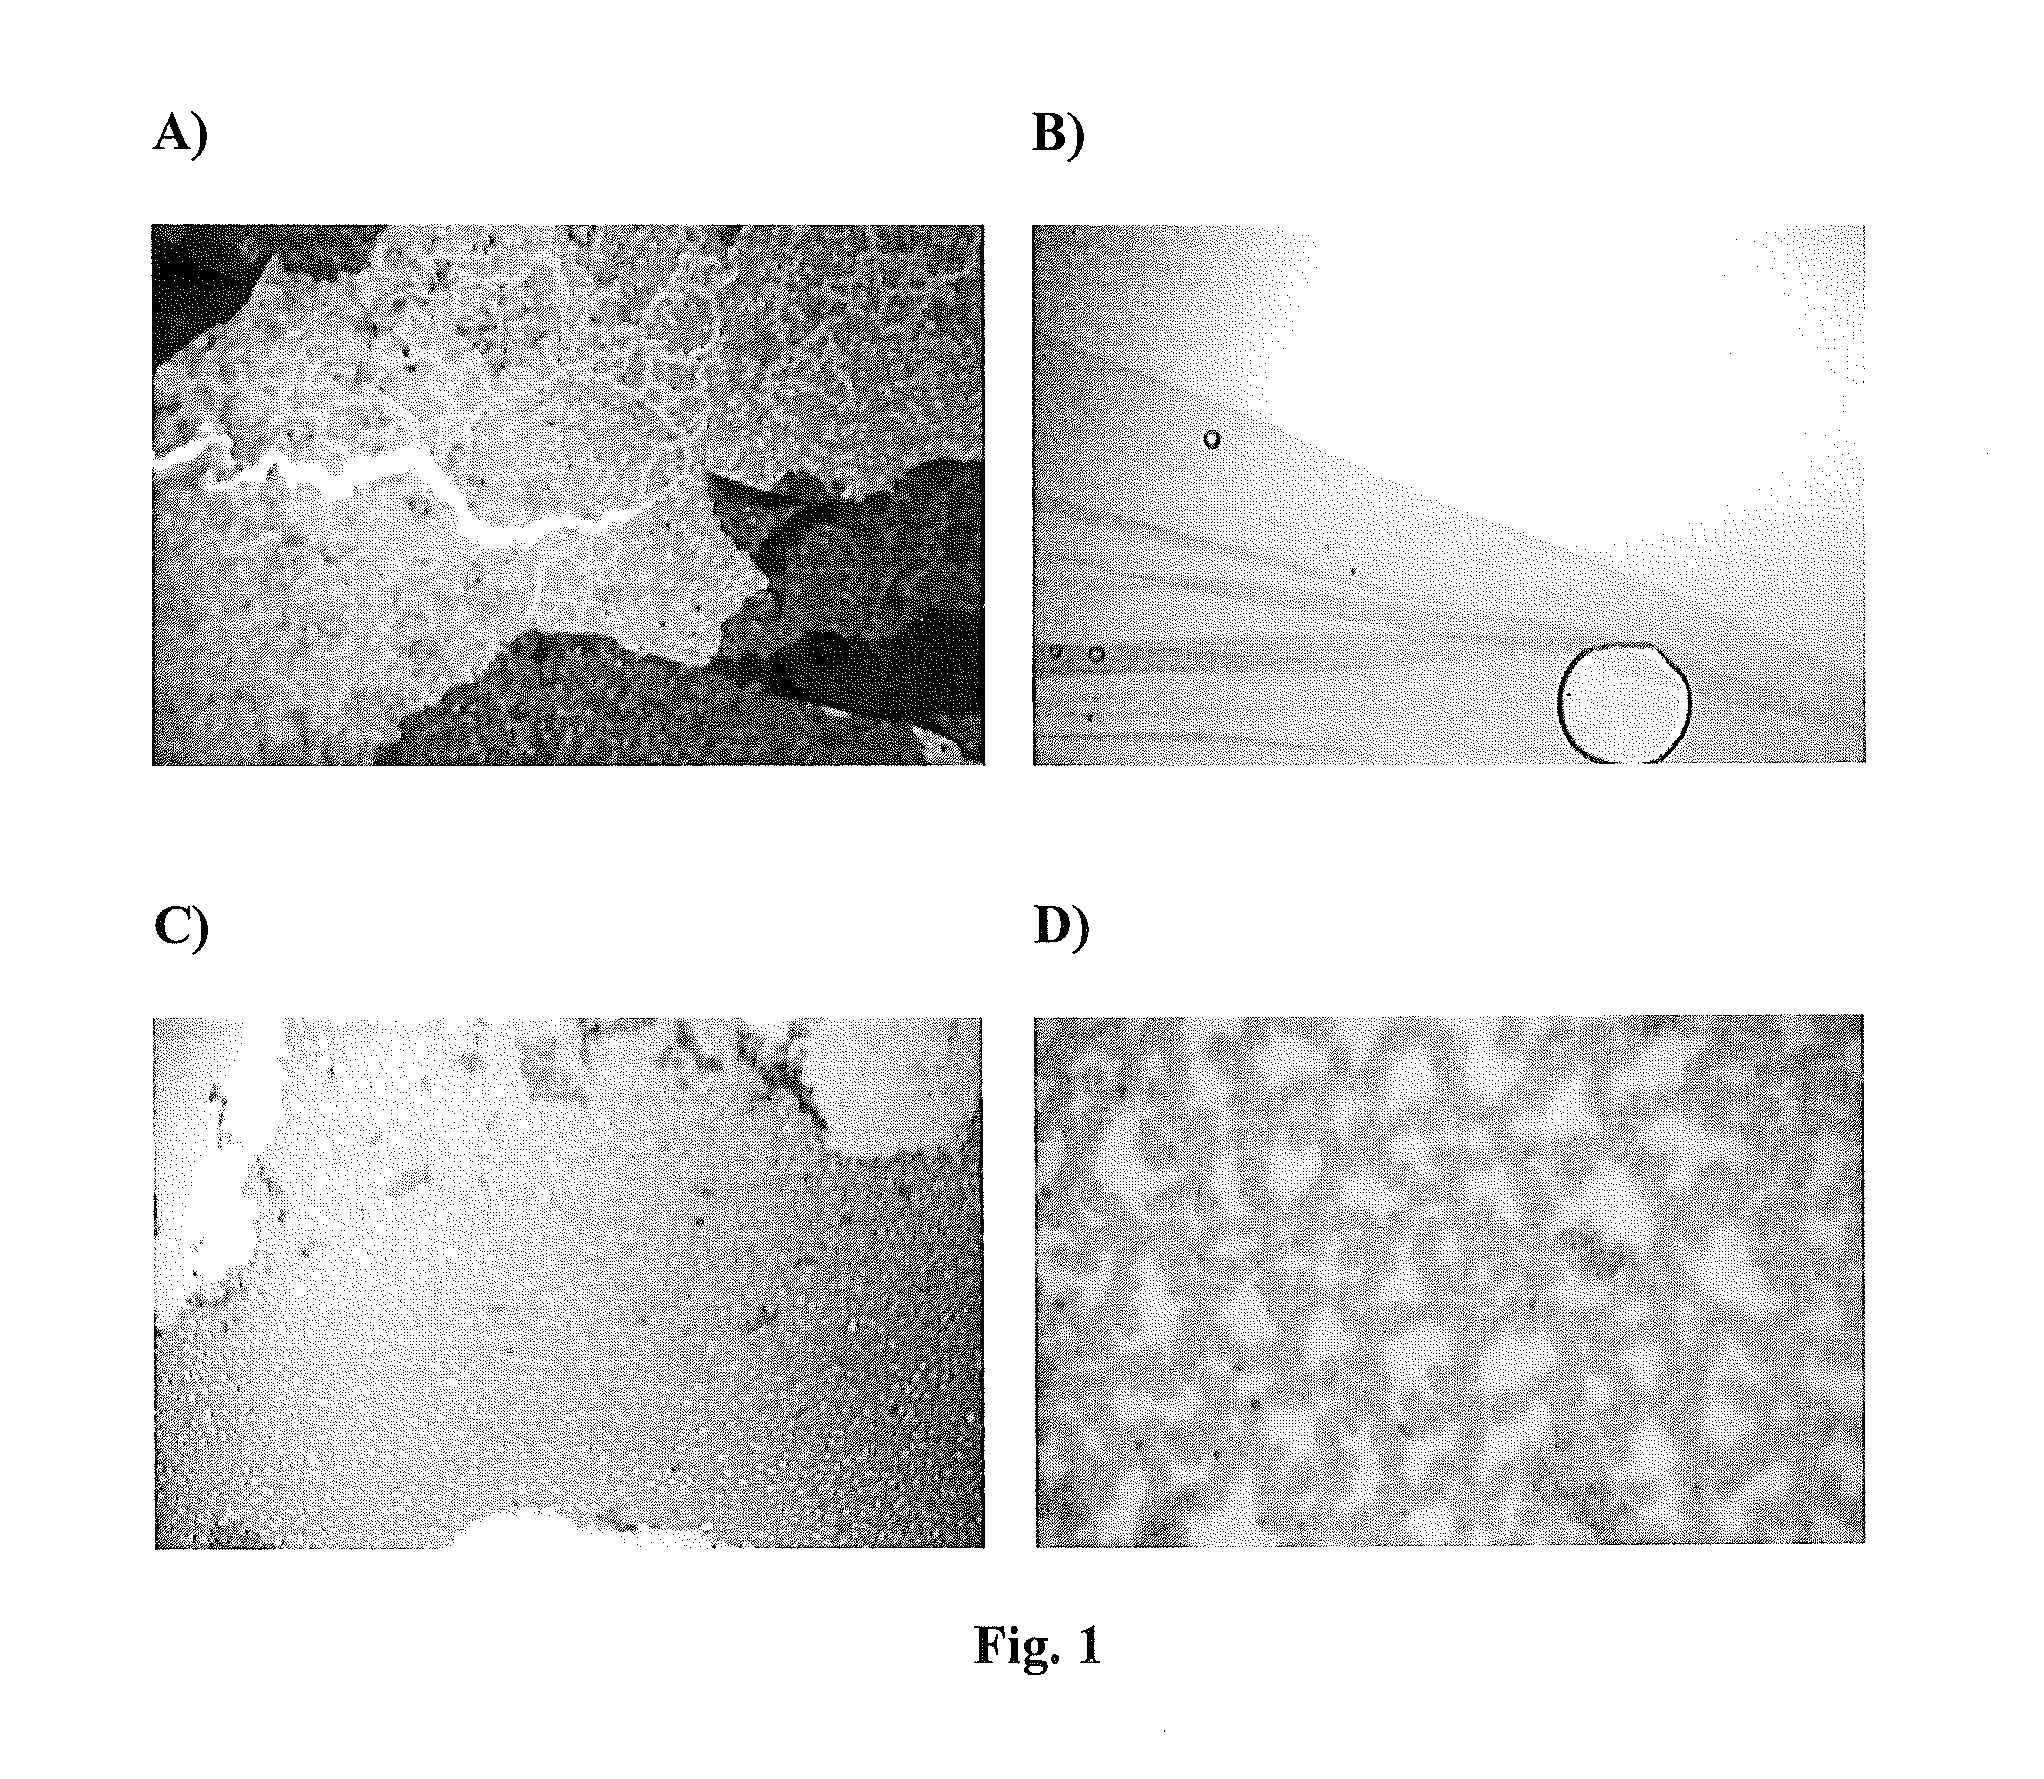 Polymers, substrates, methods for making such, and devices comprising the same